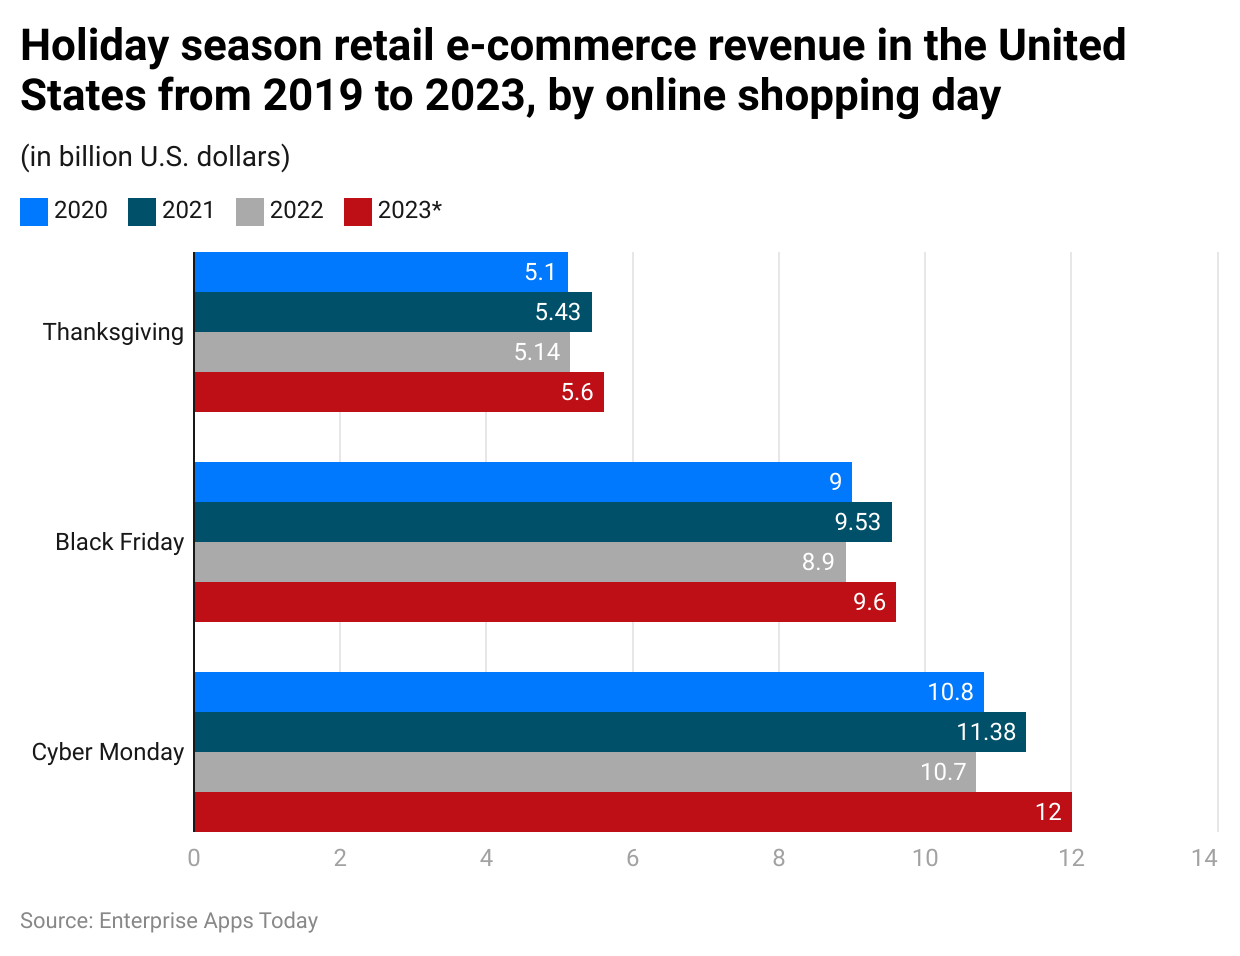 holiday-season-retail-e-commerce-revenue-in-the-united-states-from-2019-to-2023-by-online-shopping-day